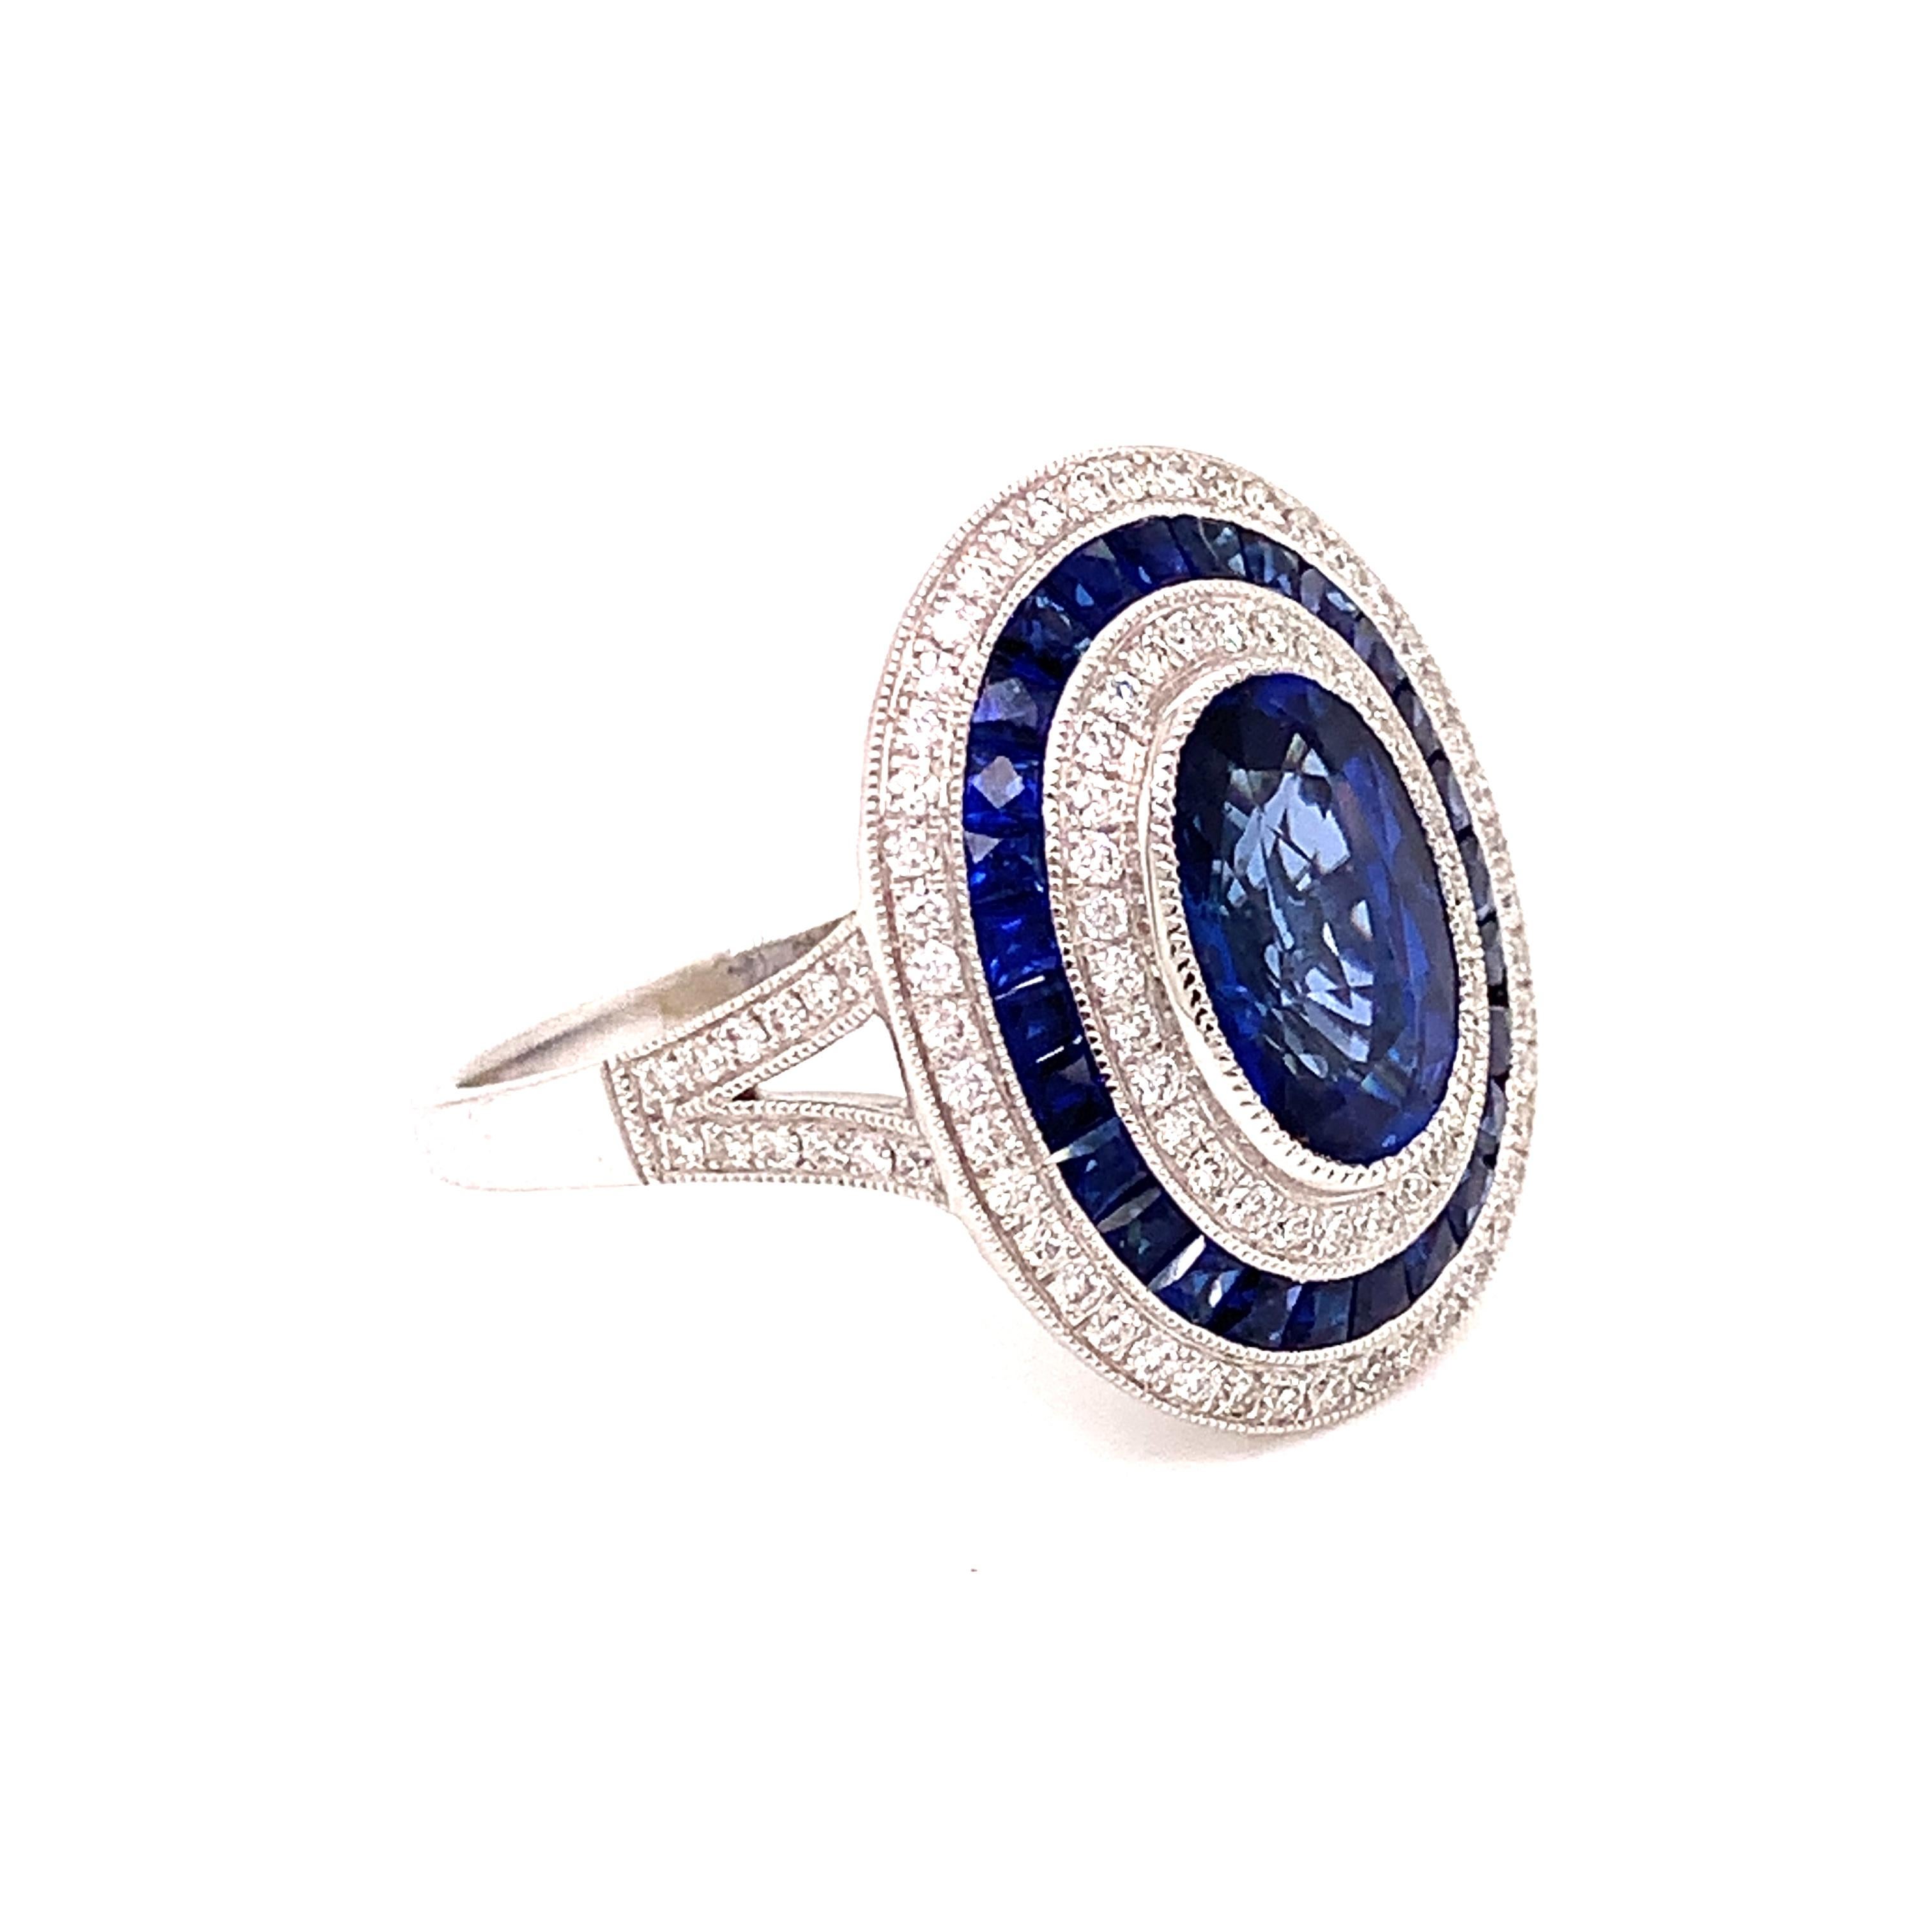 Old world craftsmanship with todays technology, this vintage art deco inspired ring may be even better than Grandmas.   A stunning 2.35 carat oval sapphire, surrounded by .37 cttw in round diamonds and .79 cttw in french cut ceylon sapphires.  4.27